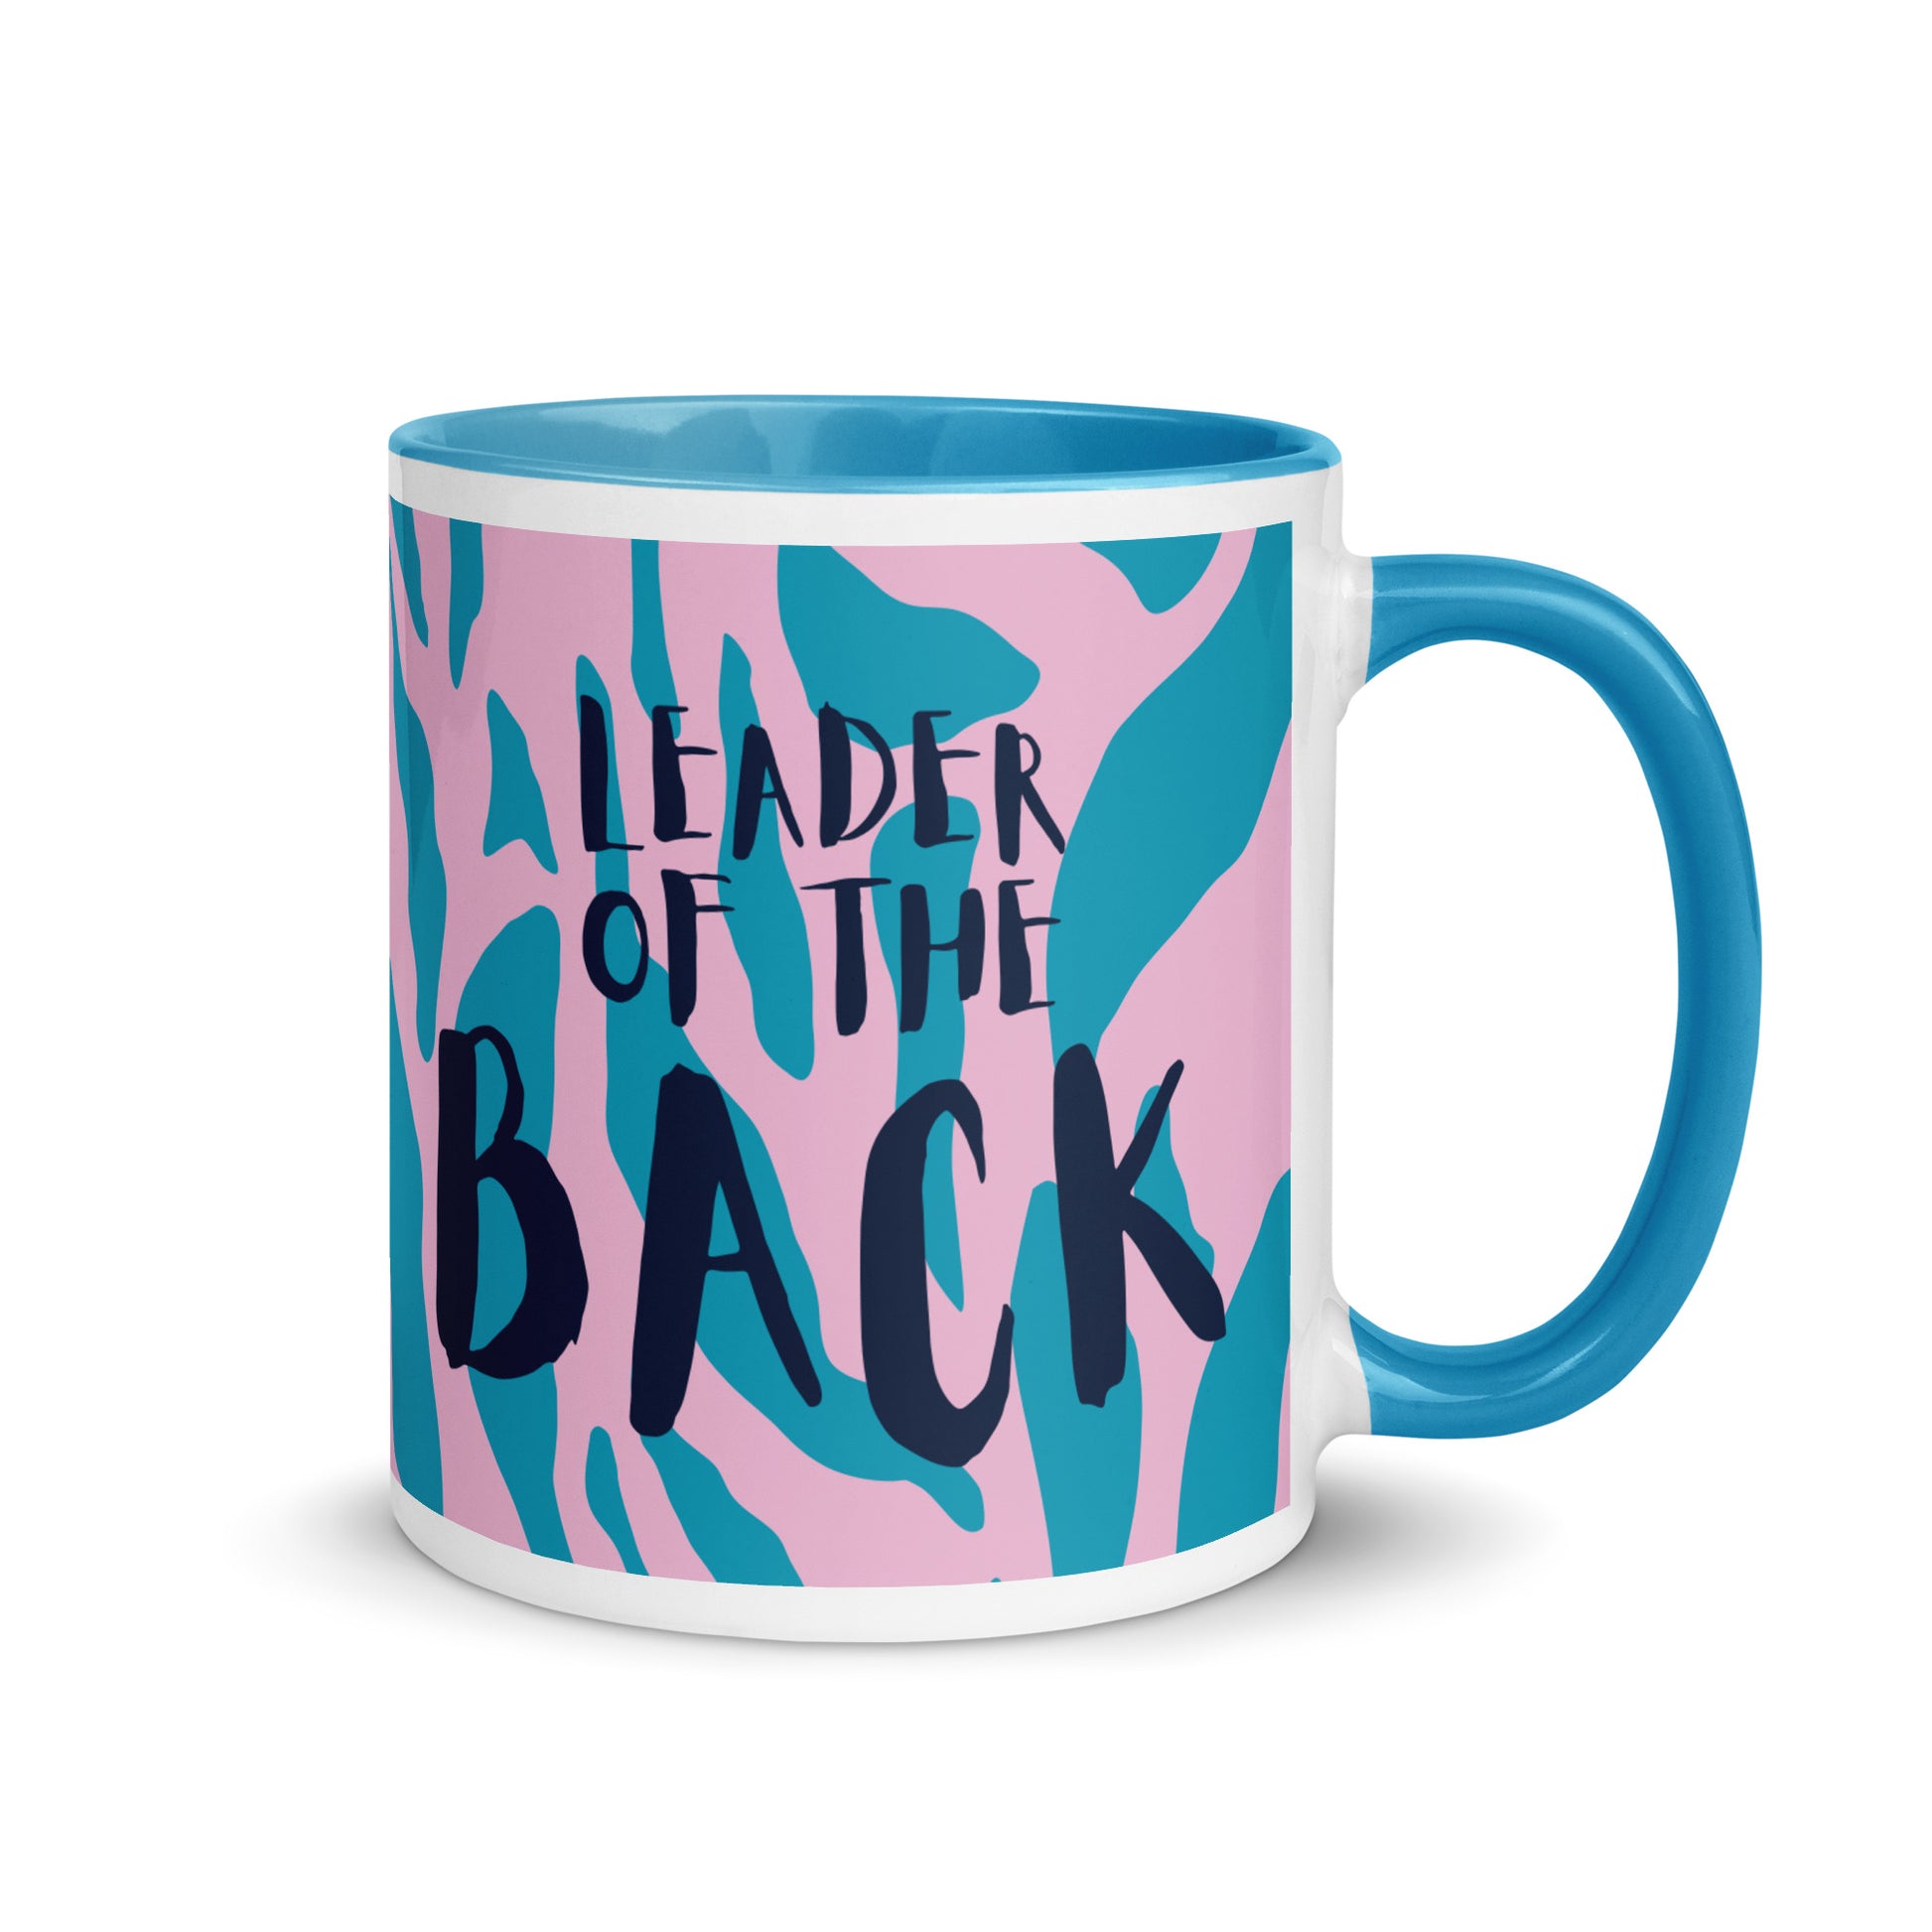 mug with blue and pink animal print, and blue handle with the phrase leader of the back across the front. a gift for slow runners